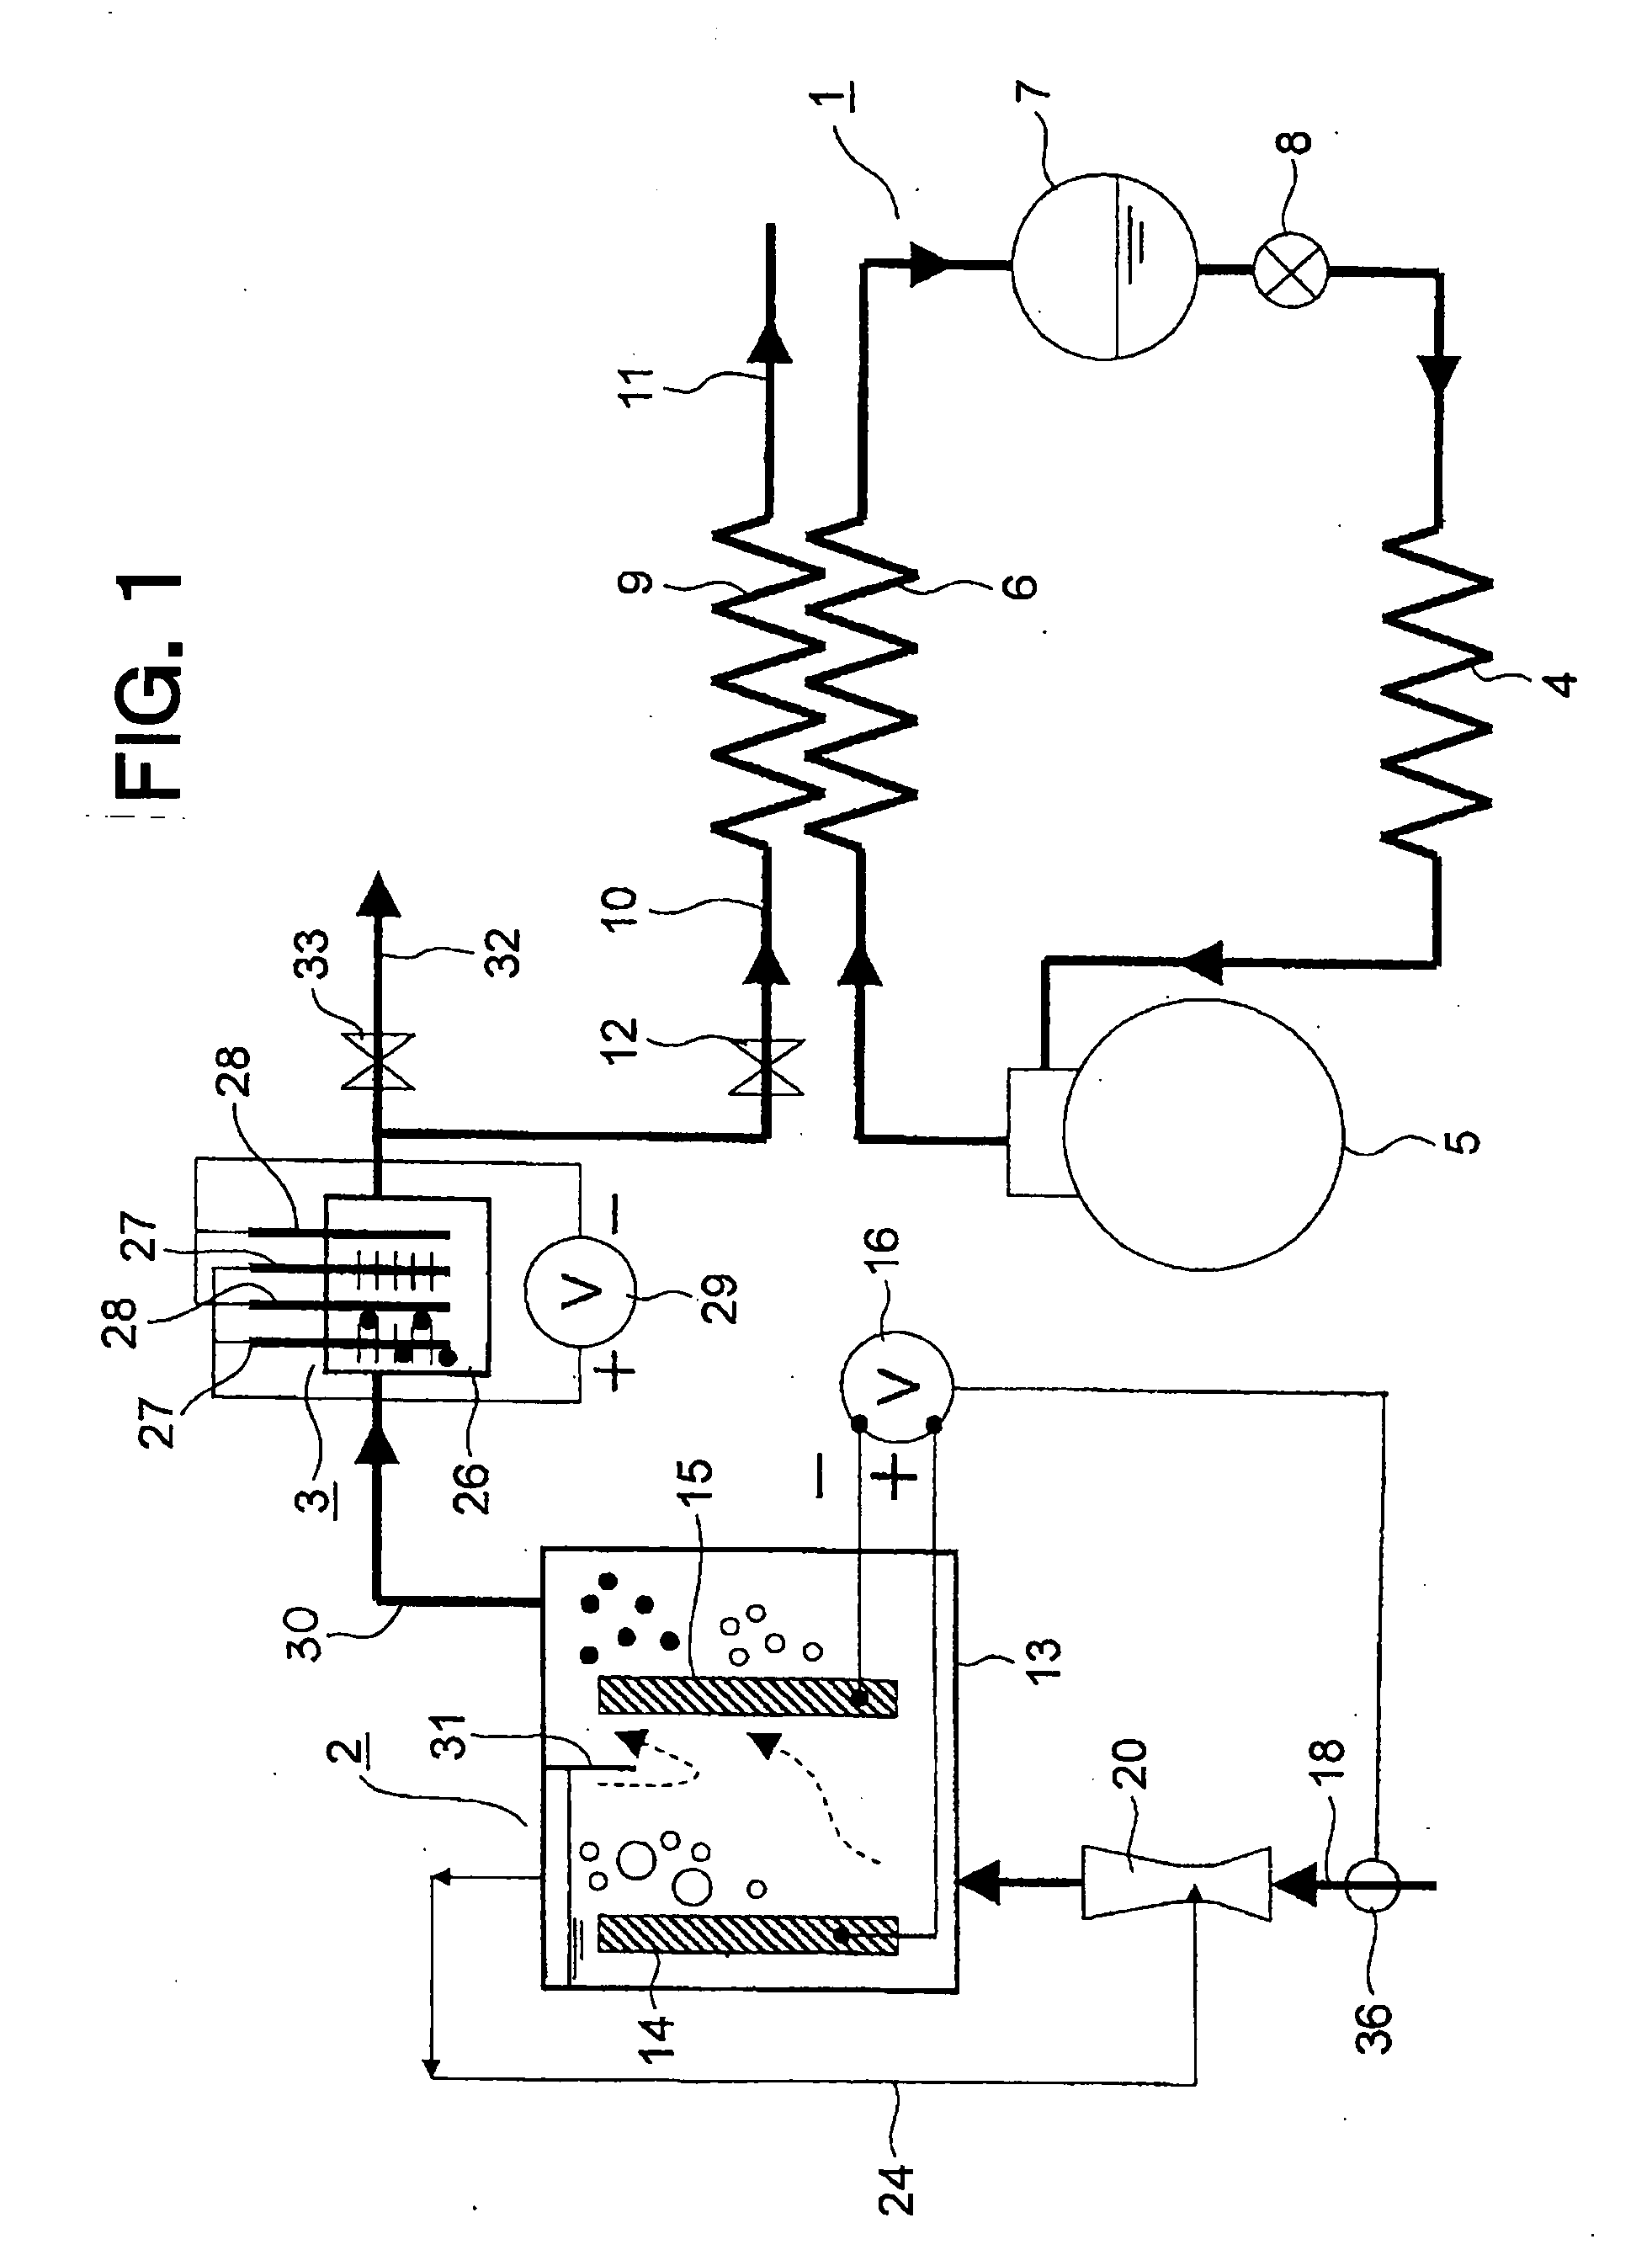 Scale deposition device and water heater